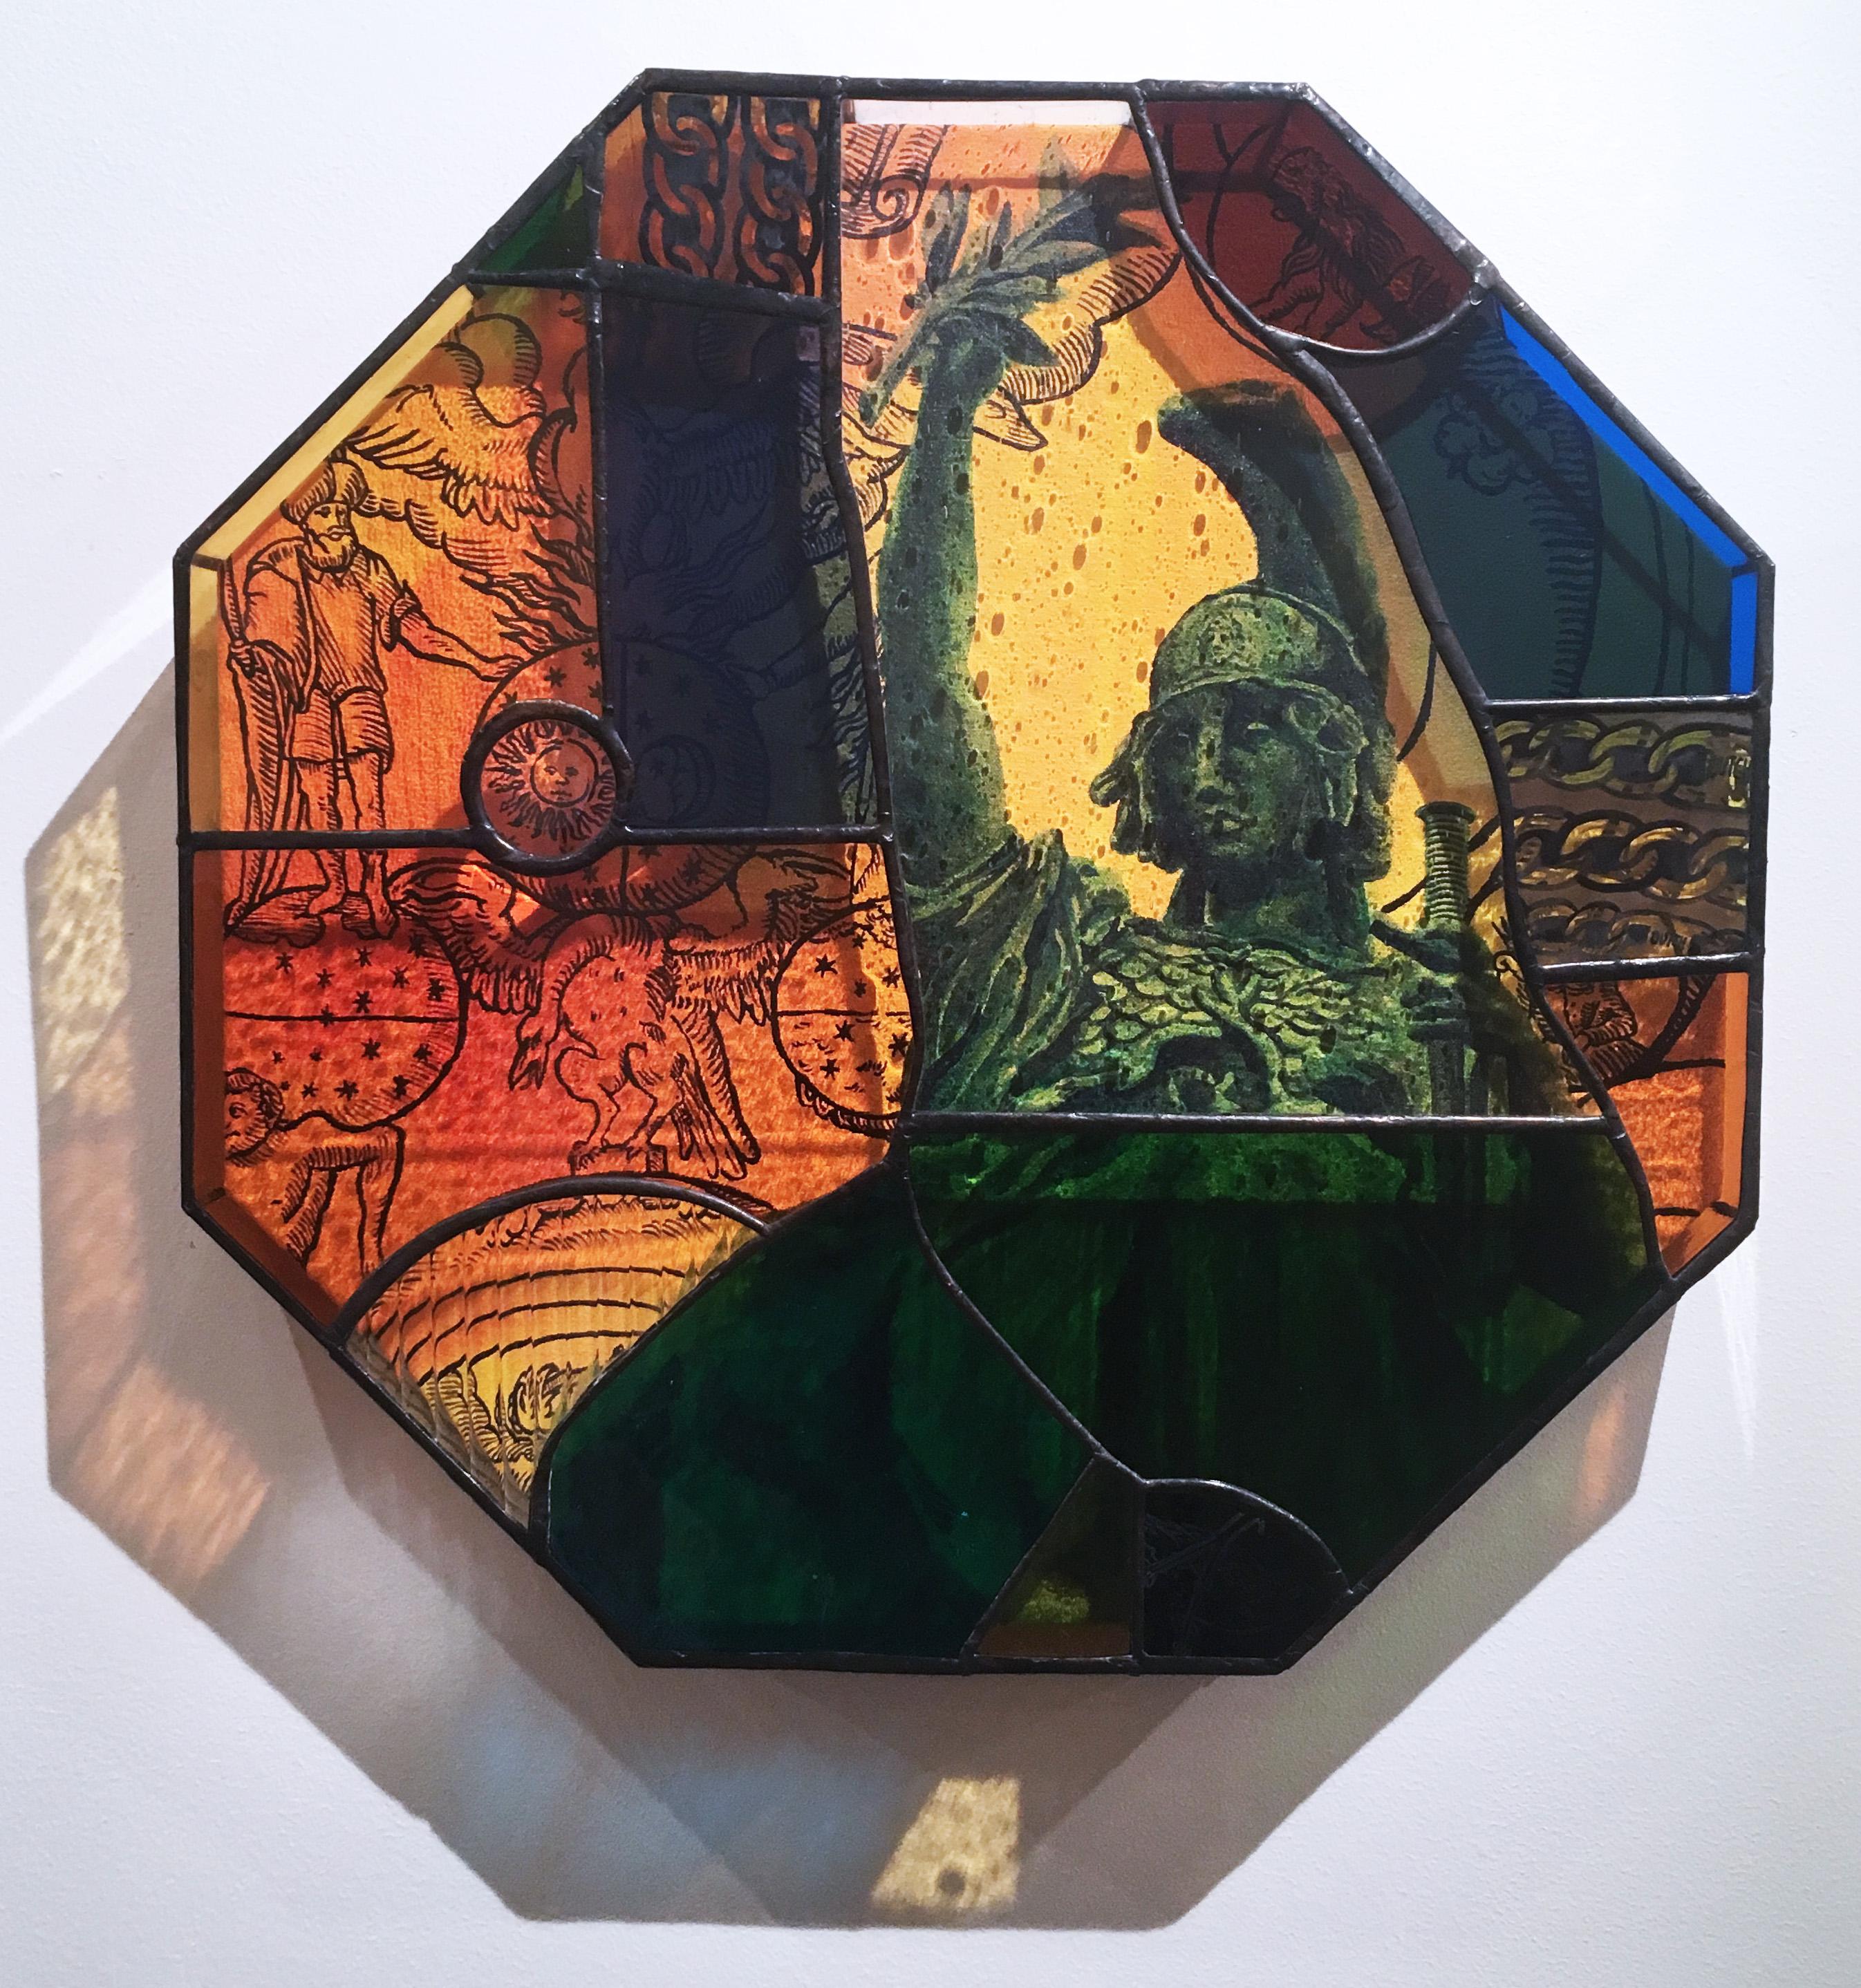 Earth People, 2020, stained glass, acrylic, canvas, octagon, statue, orange